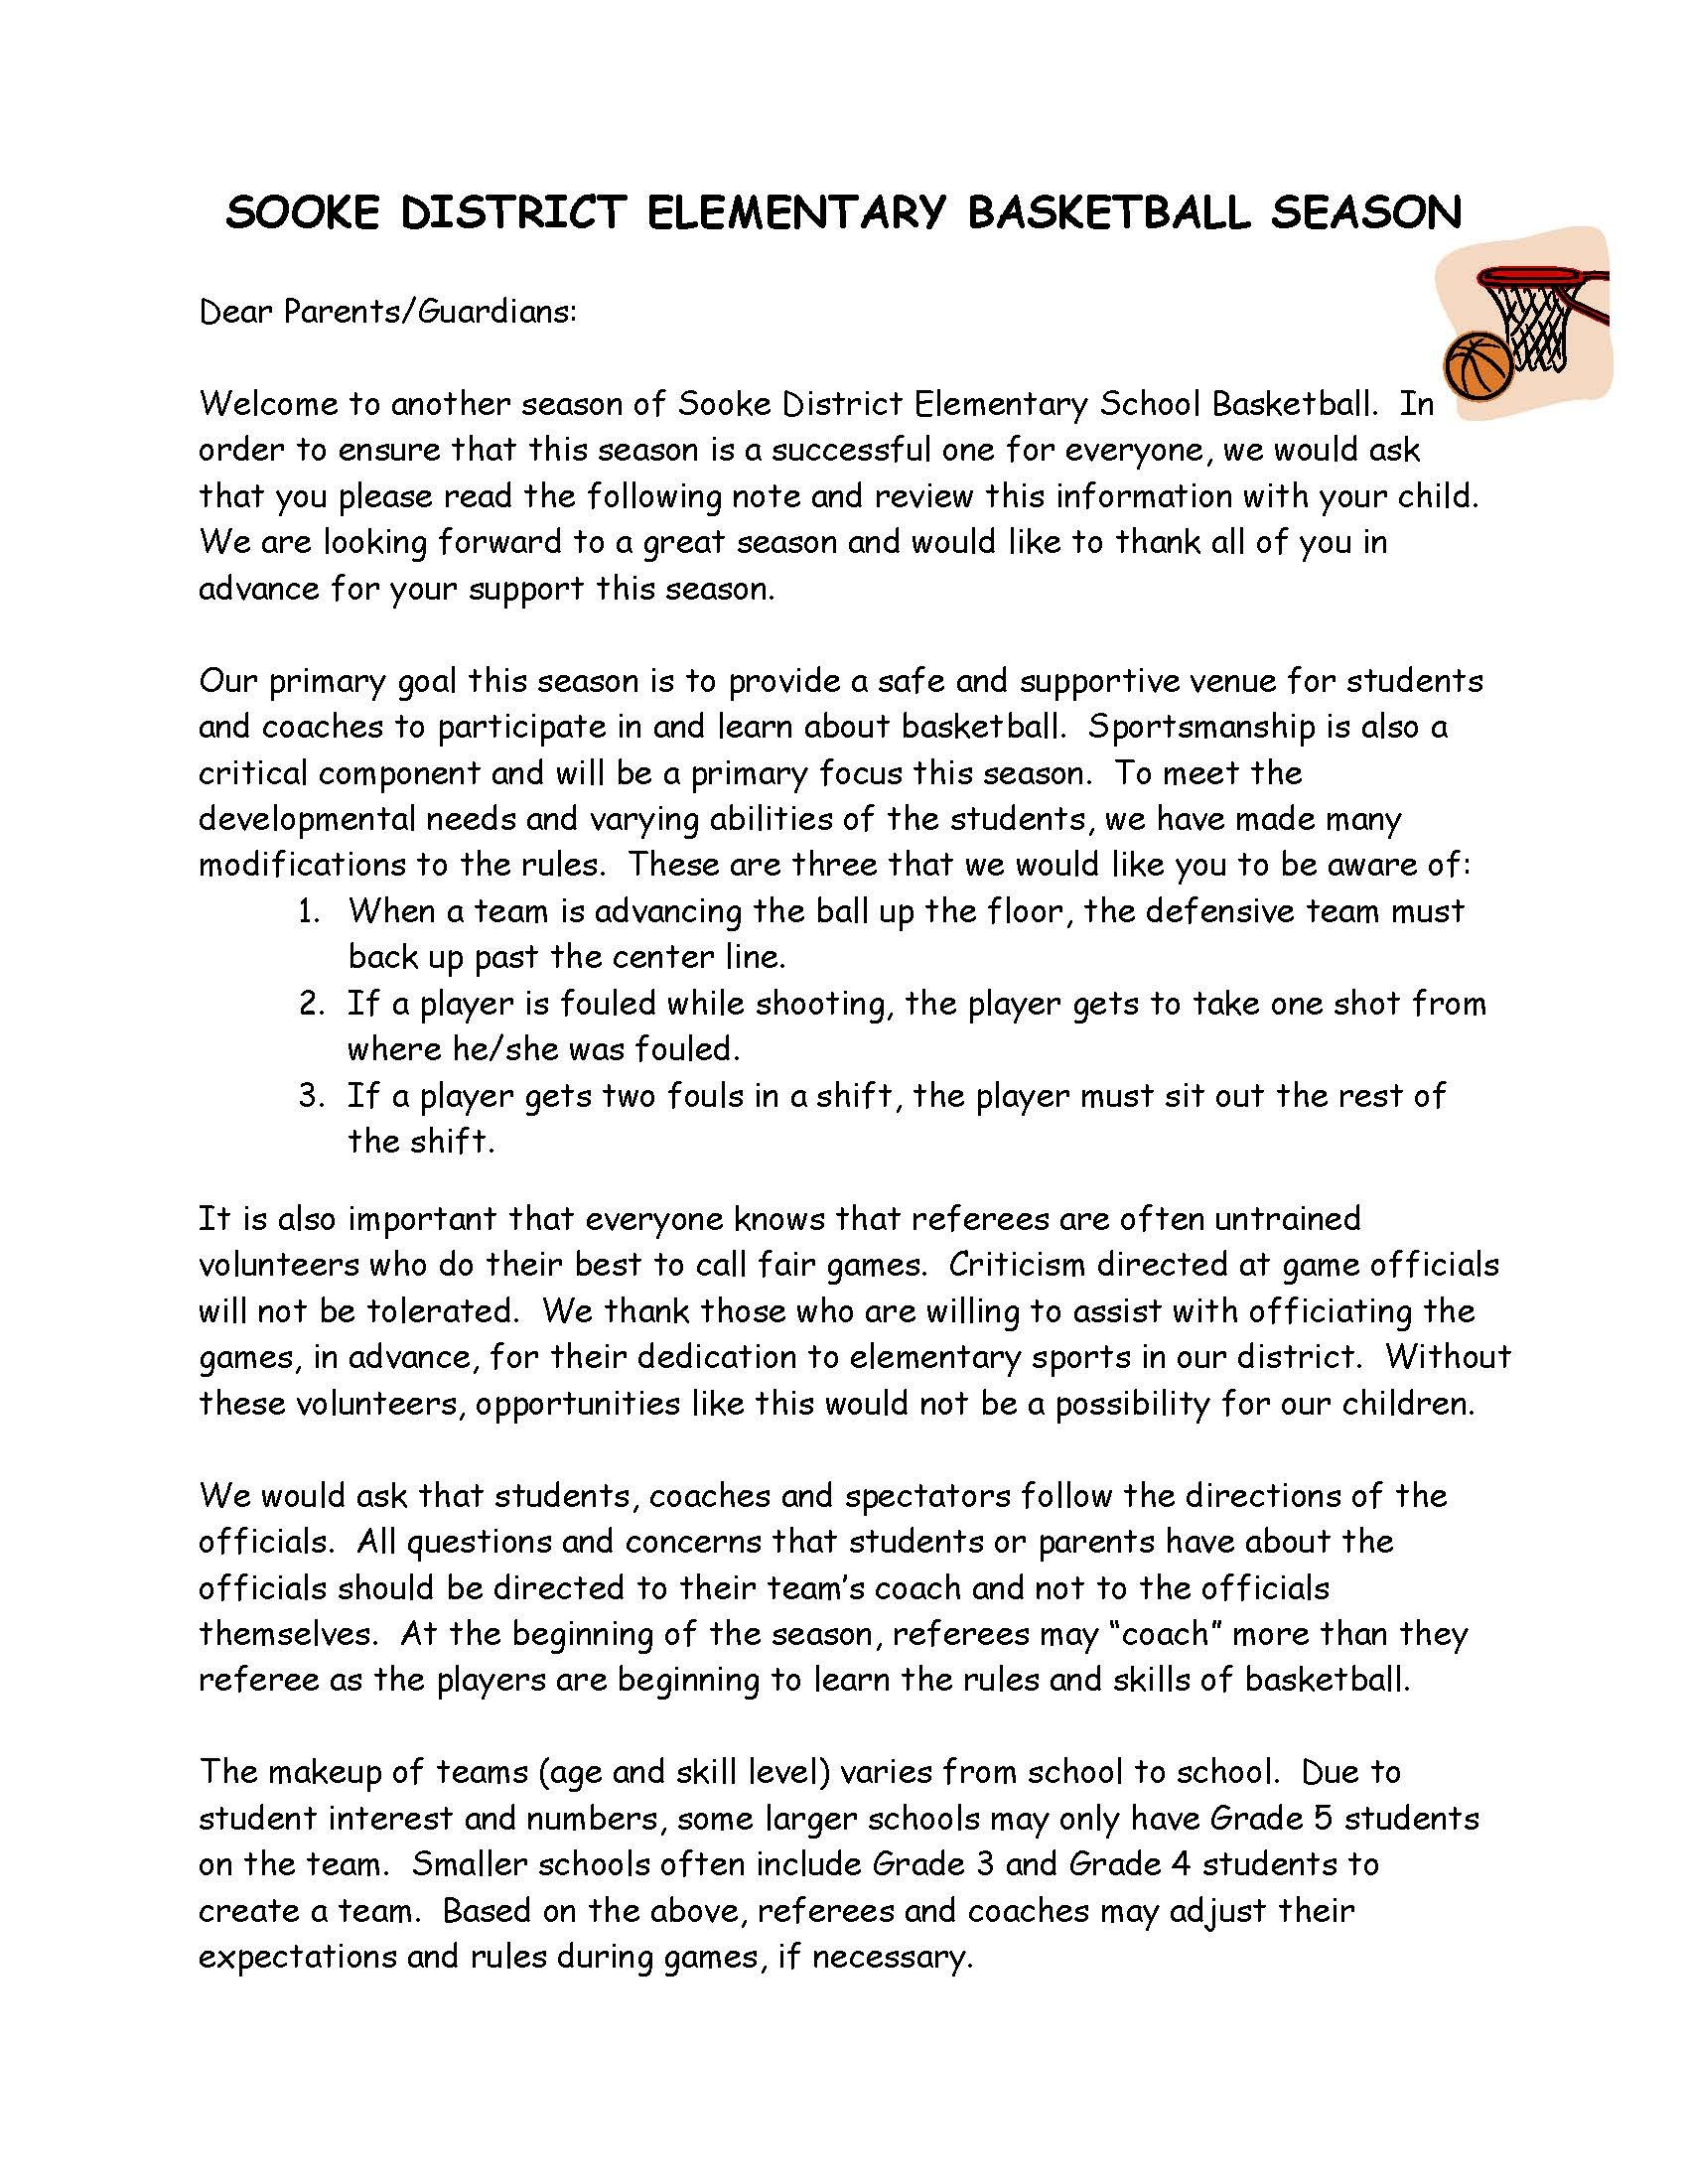 Team Mom Letter to Parents 2017 Basketball Letter Code Of Conduct Page 1